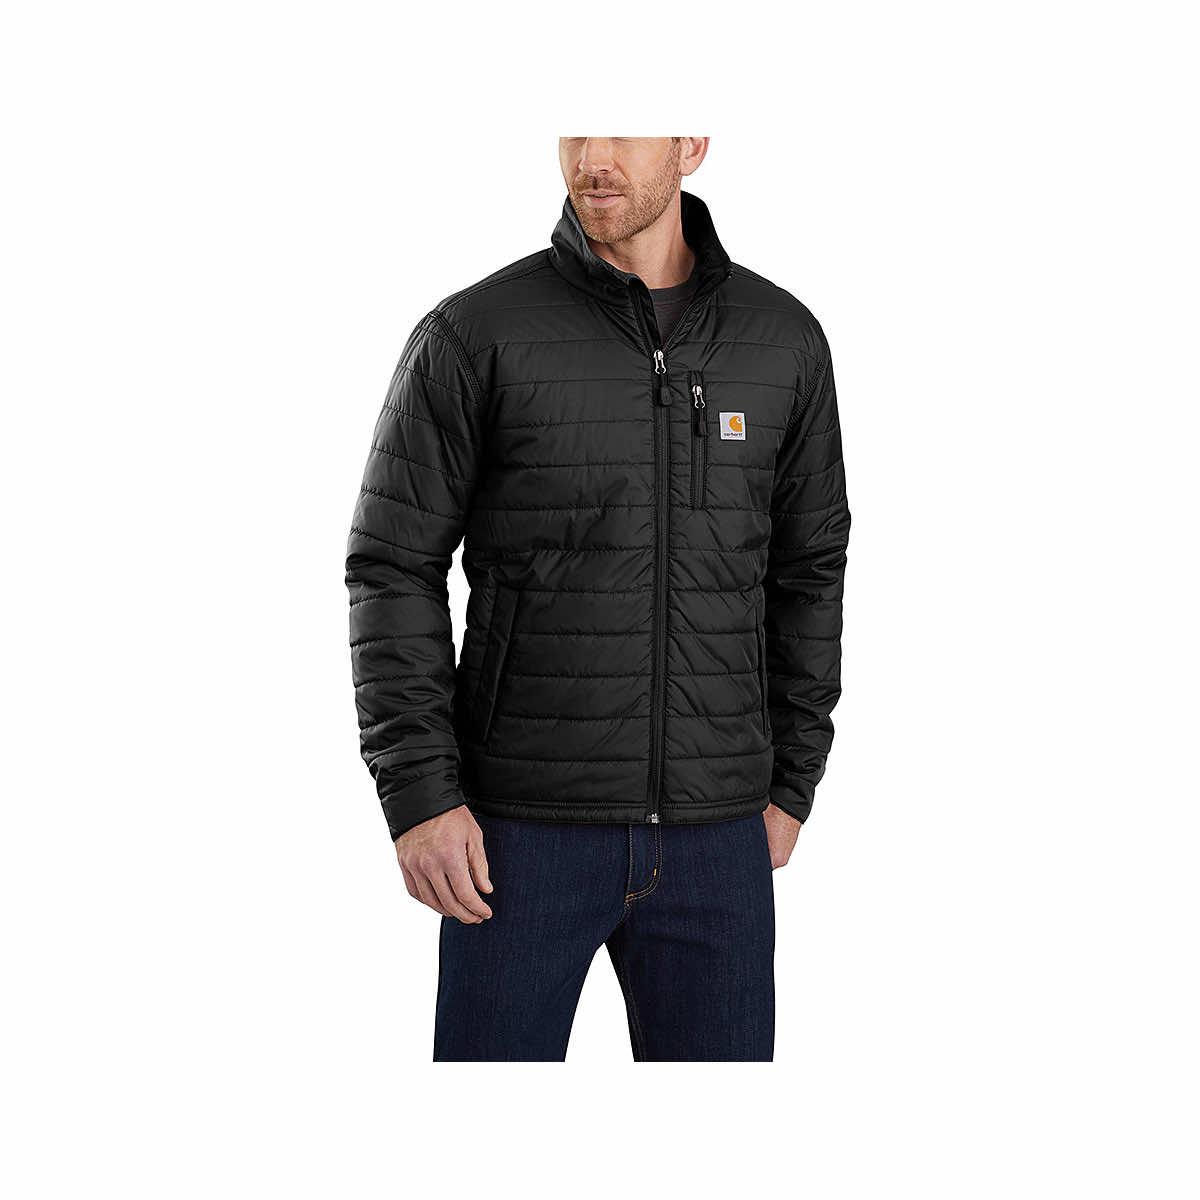  Men's Rain Defender Relaxed Fit Insulated Jacket